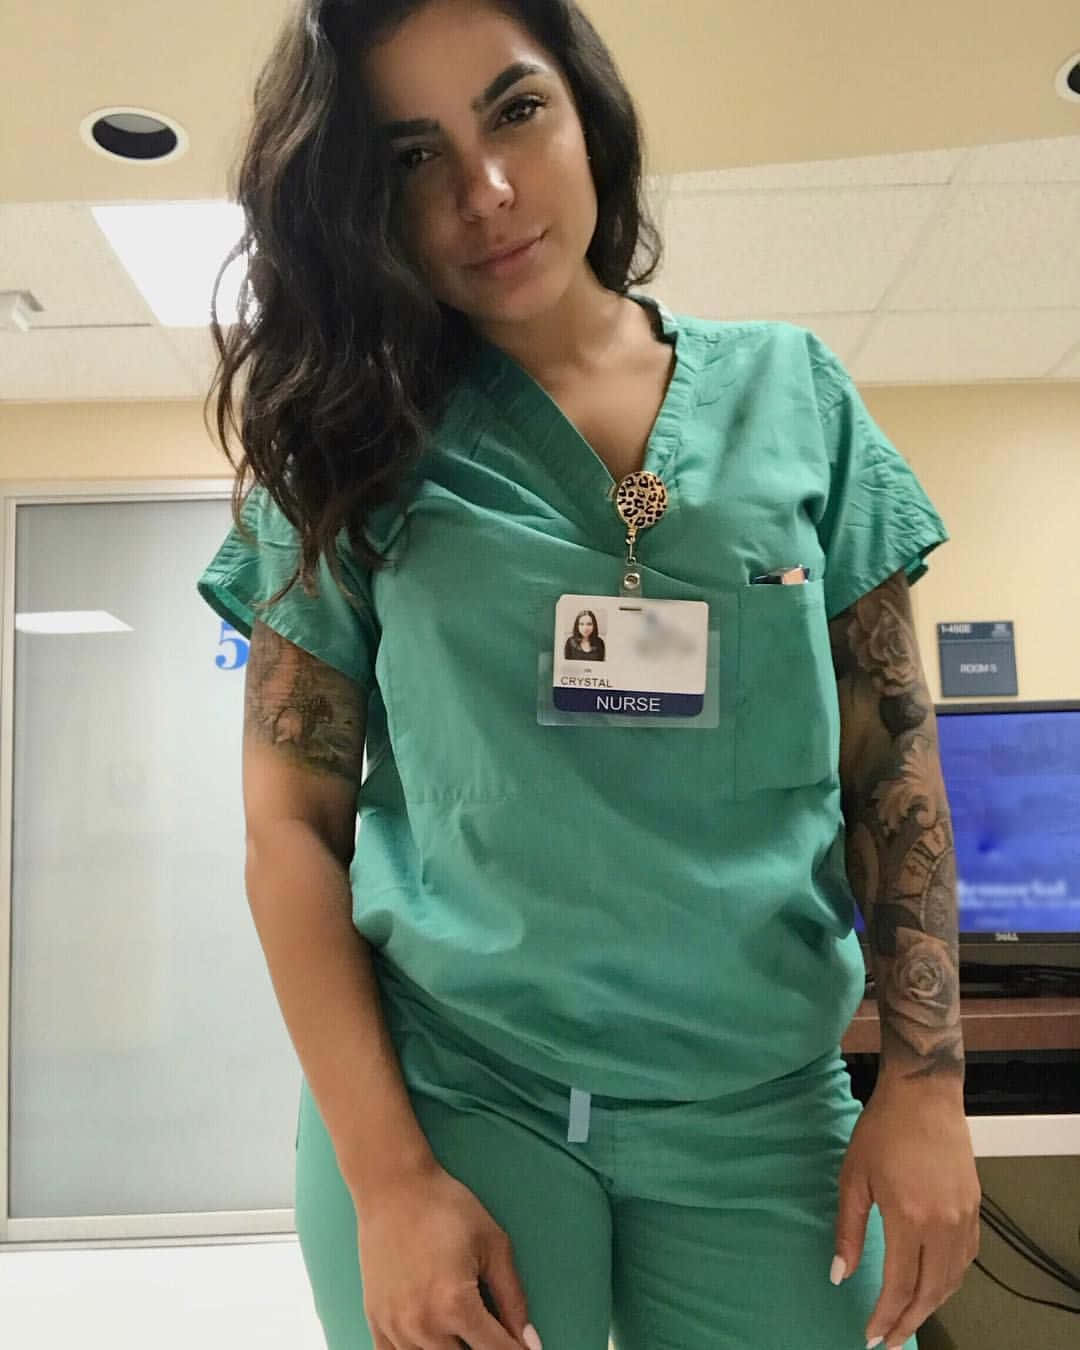 A Woman In Scrubs Posing For A Photo